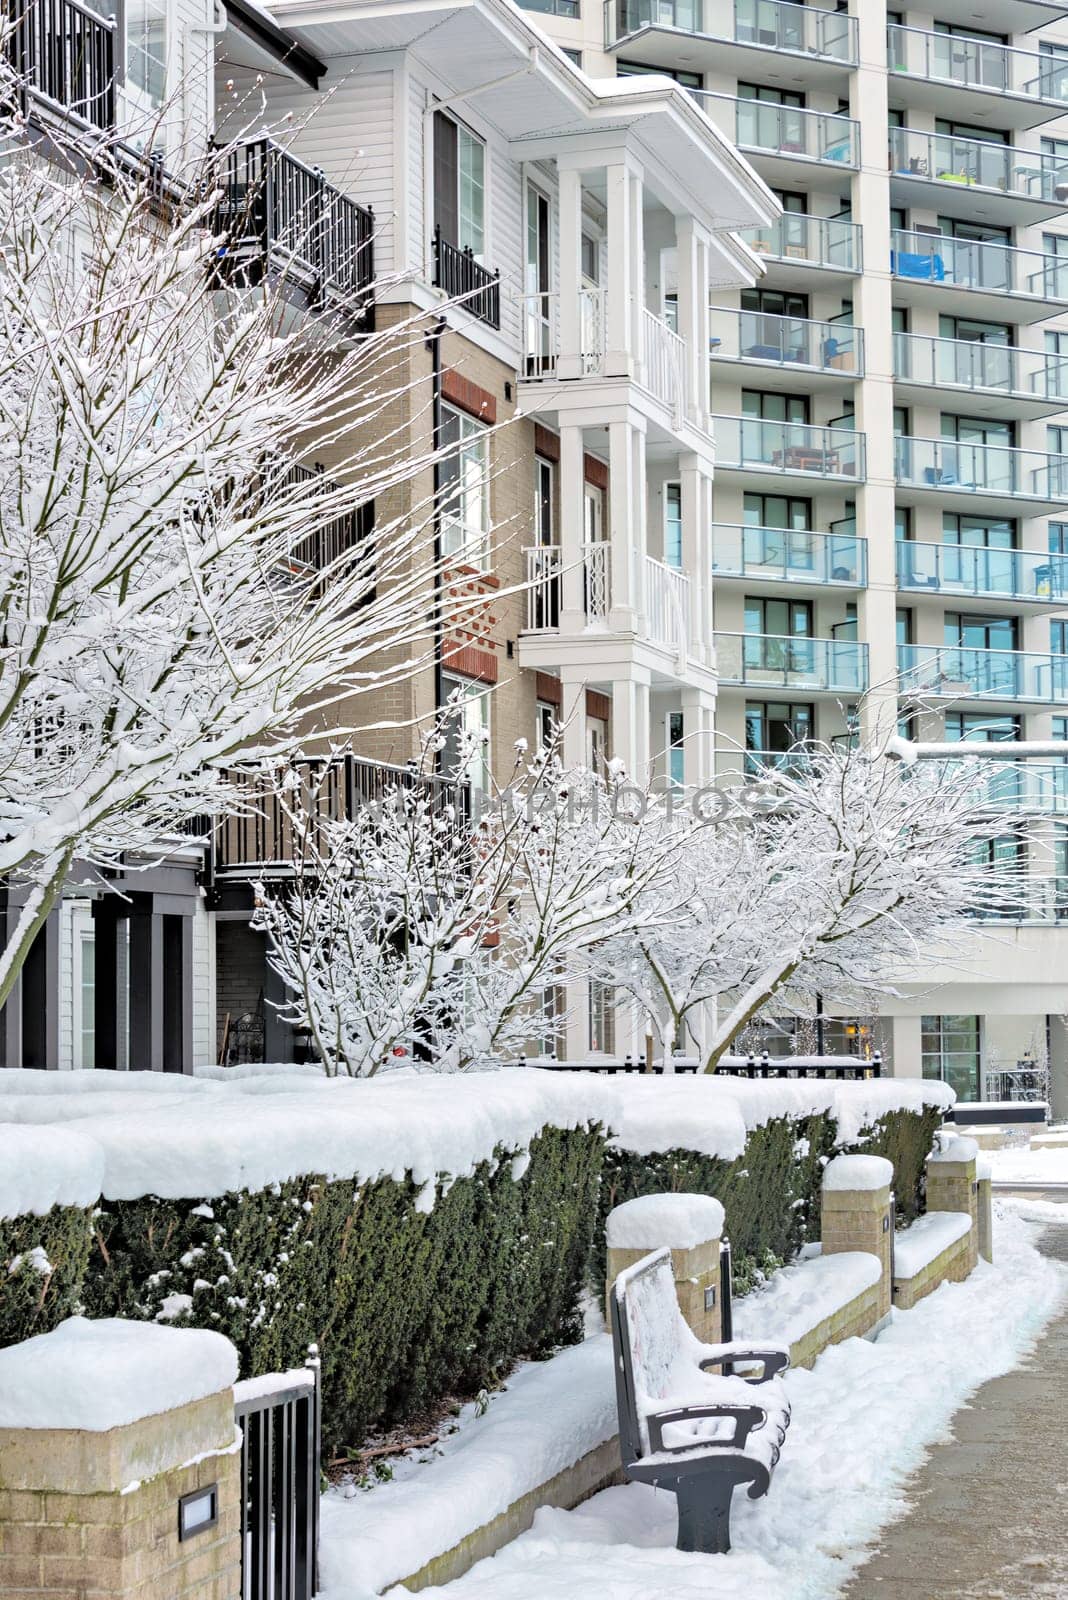 High-rise and low-rise residential buildings on winter season in Vancouver, Canada